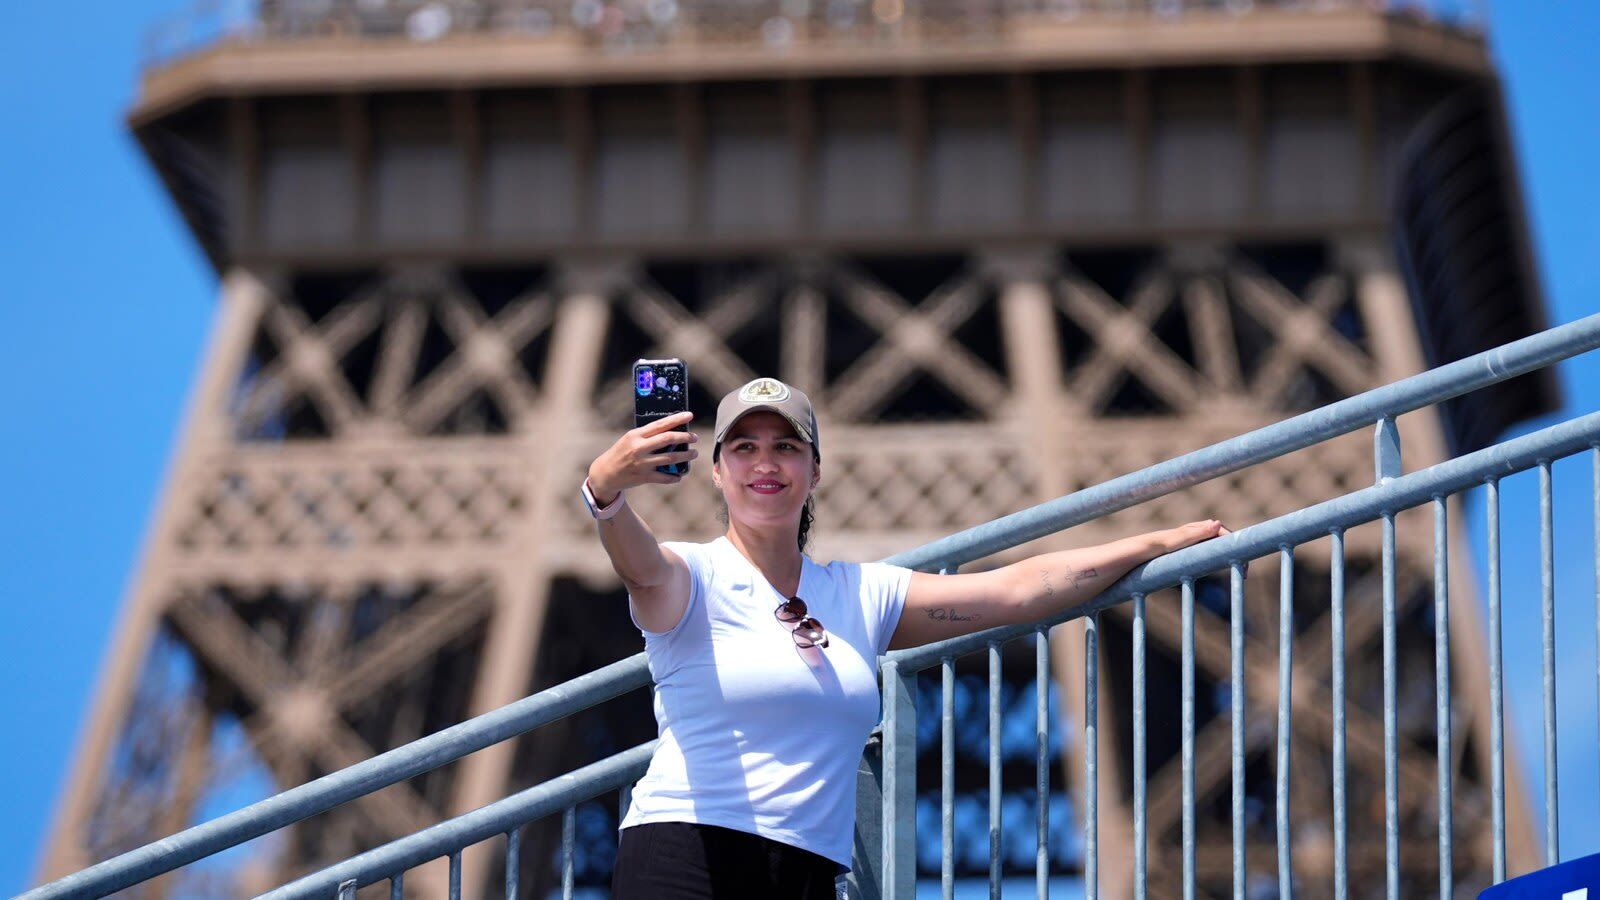 Eiffel Tower Stadium at the 2024 Olympics is becoming a popular backdrop for selfies